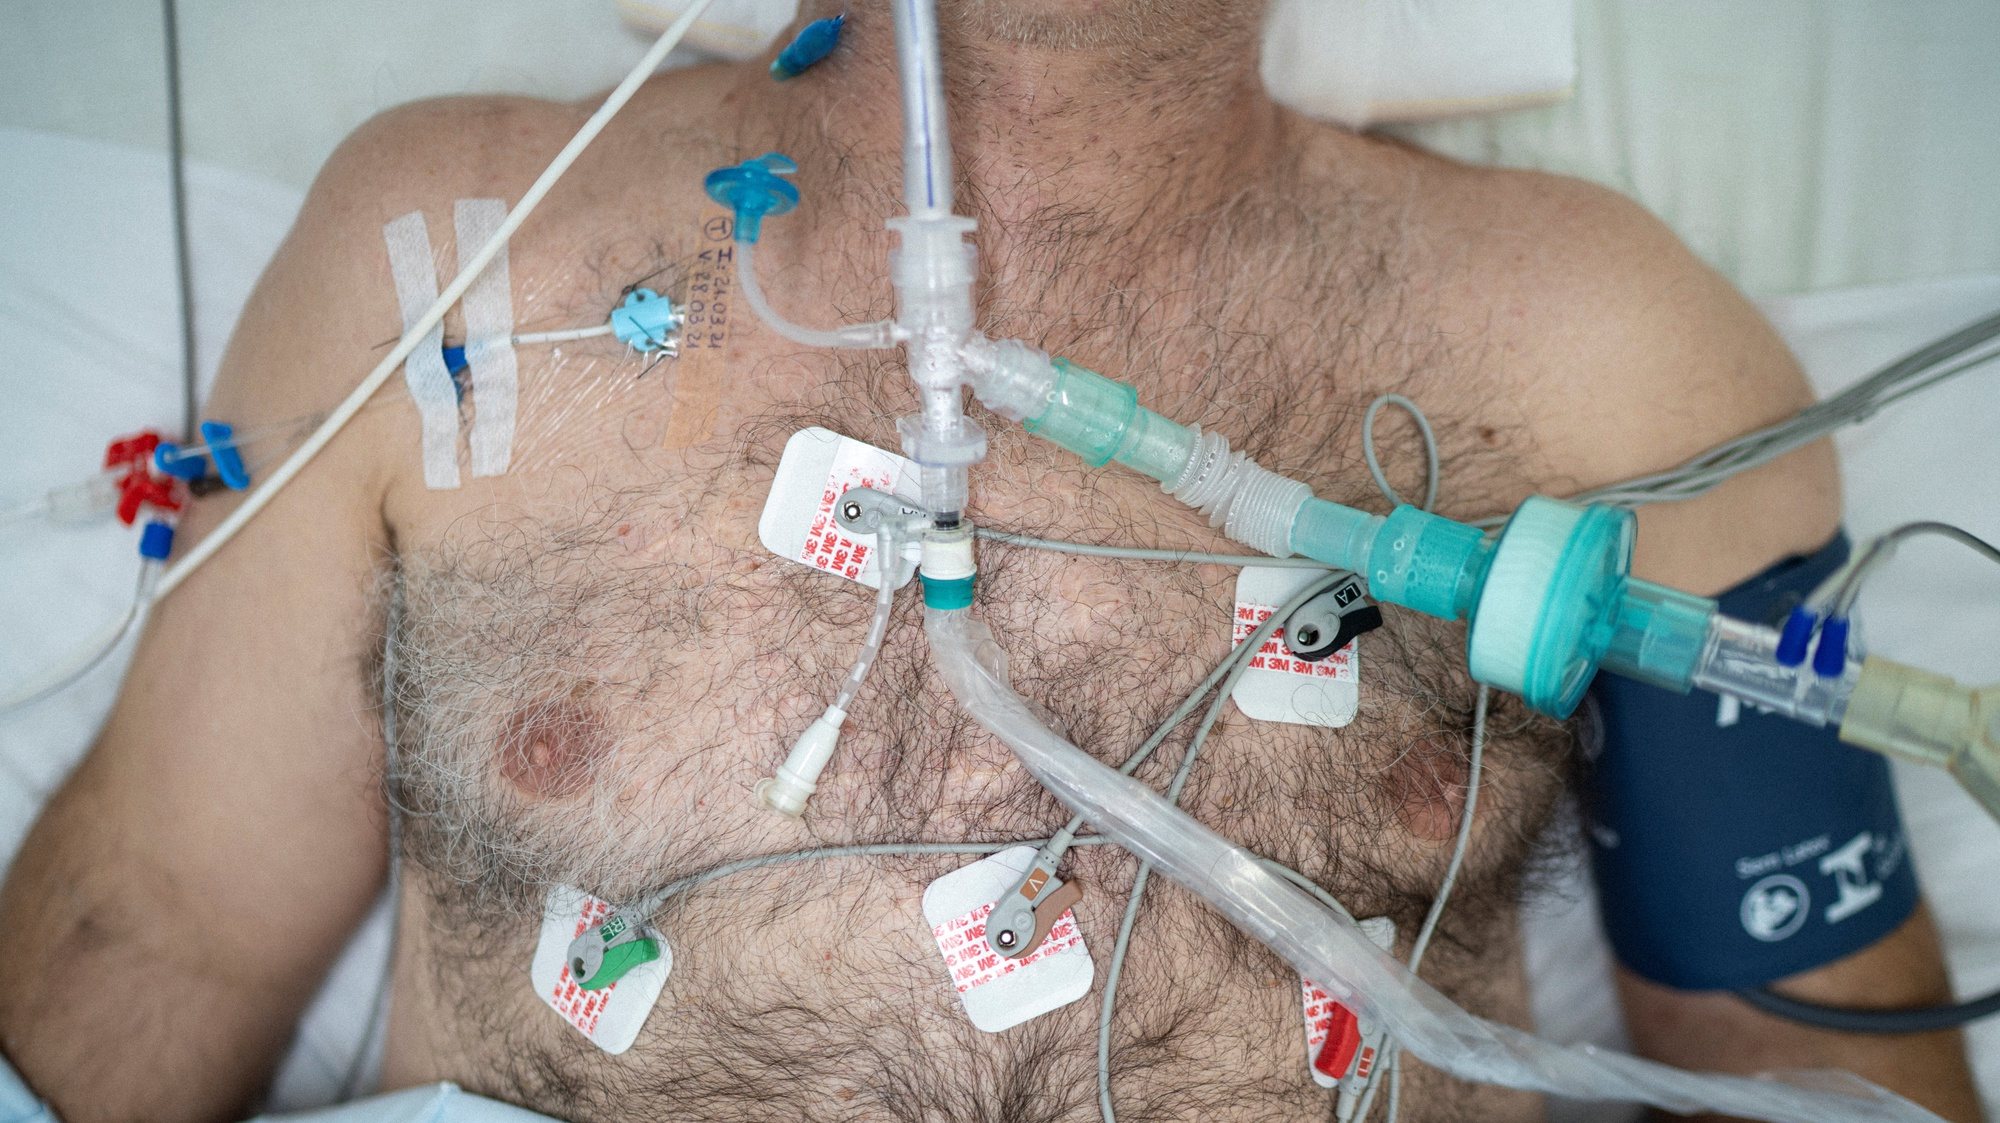 epa09094352 The chest of a patient who in turn is intubated in the Centenario hospital, in SÃ£o Leopoldo, Rio Grande do Sul, Brazil, 23 March 2021 (Issued 24 March 2021). The country will possibly reach the figure of 300,000 deaths on 24 March from causes related to the coronavirus. SÃ£o Leopoldo, a city in the Porto Alegre metropolitan region, has just over 230,000 inhabitants and a single municipal hospital, with 18 beds to provide intensive care to COVID-19 patients.  EPA/Daniel Marenco